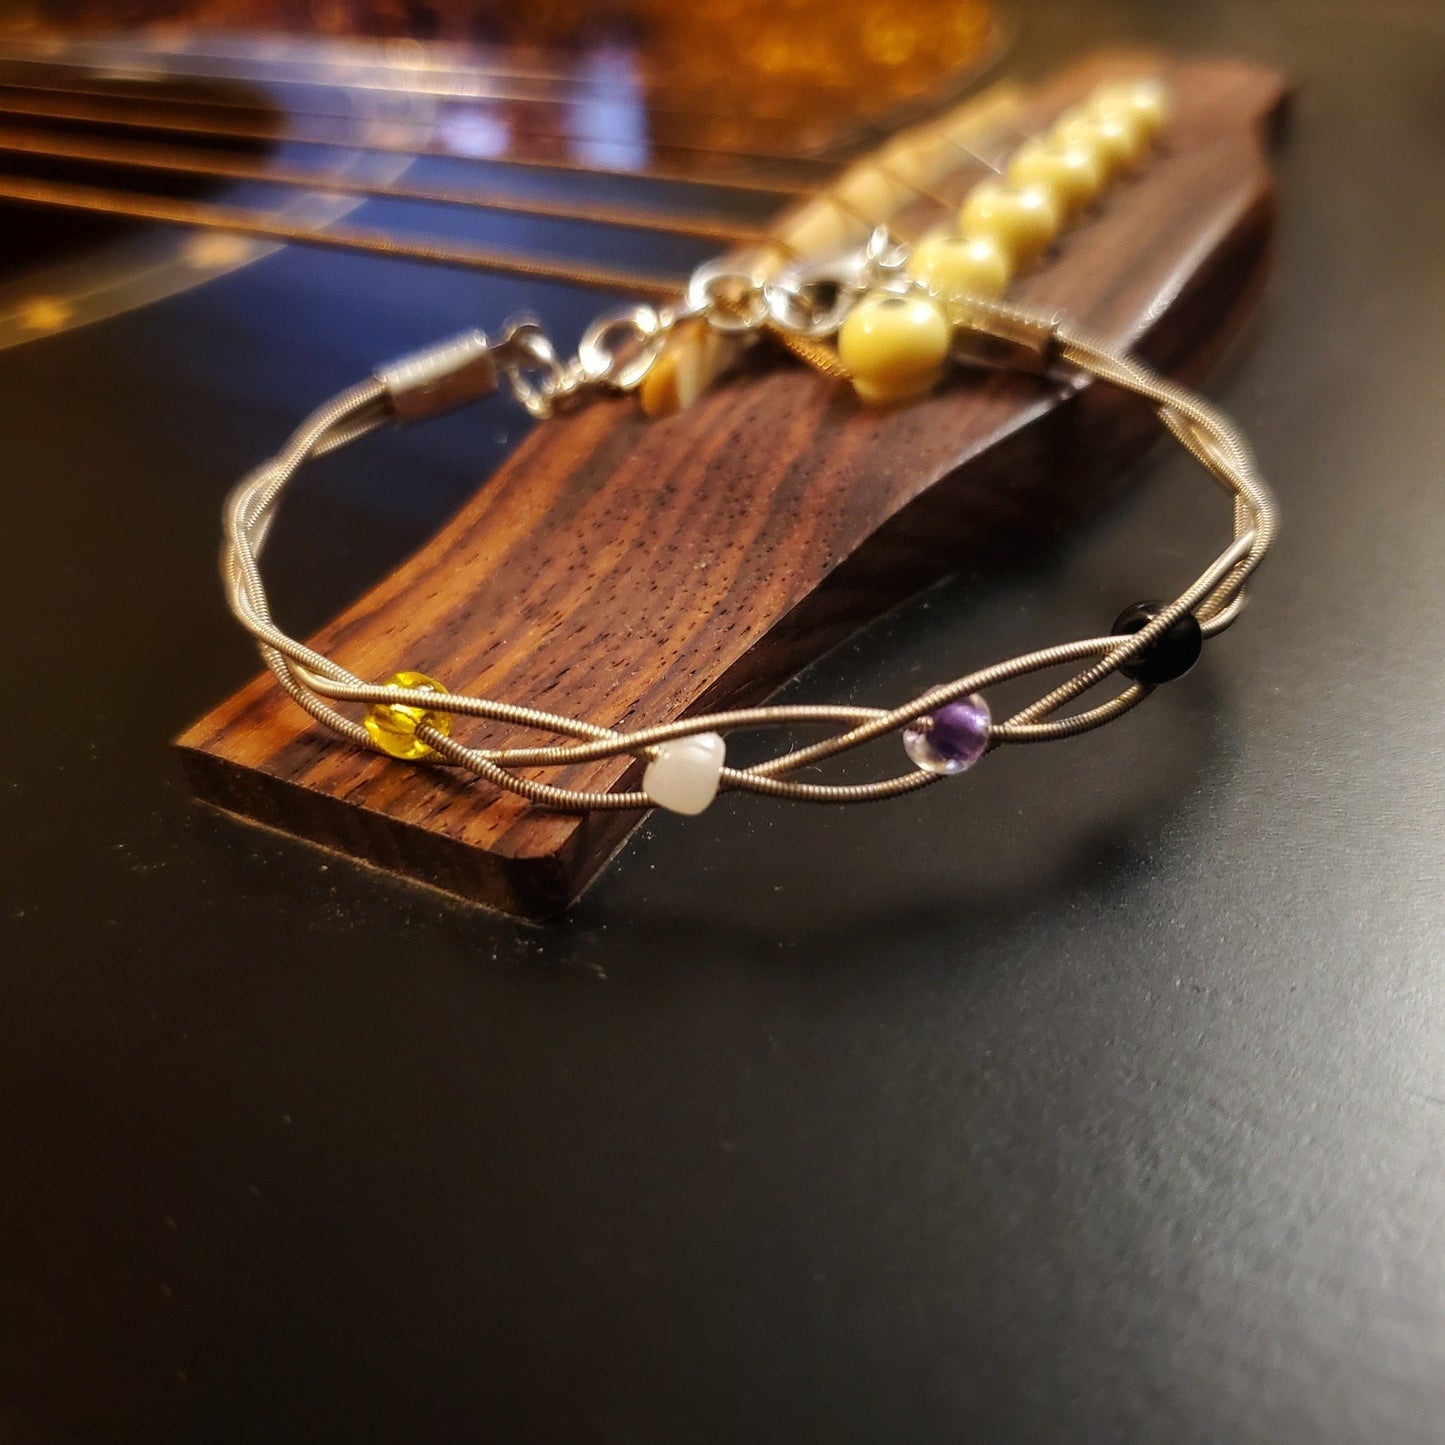 clasp style bracelet made from braided upcycled guitar strings with glass beads representing the Non-Binary Pride flag sitting on the bridge of a black guitar